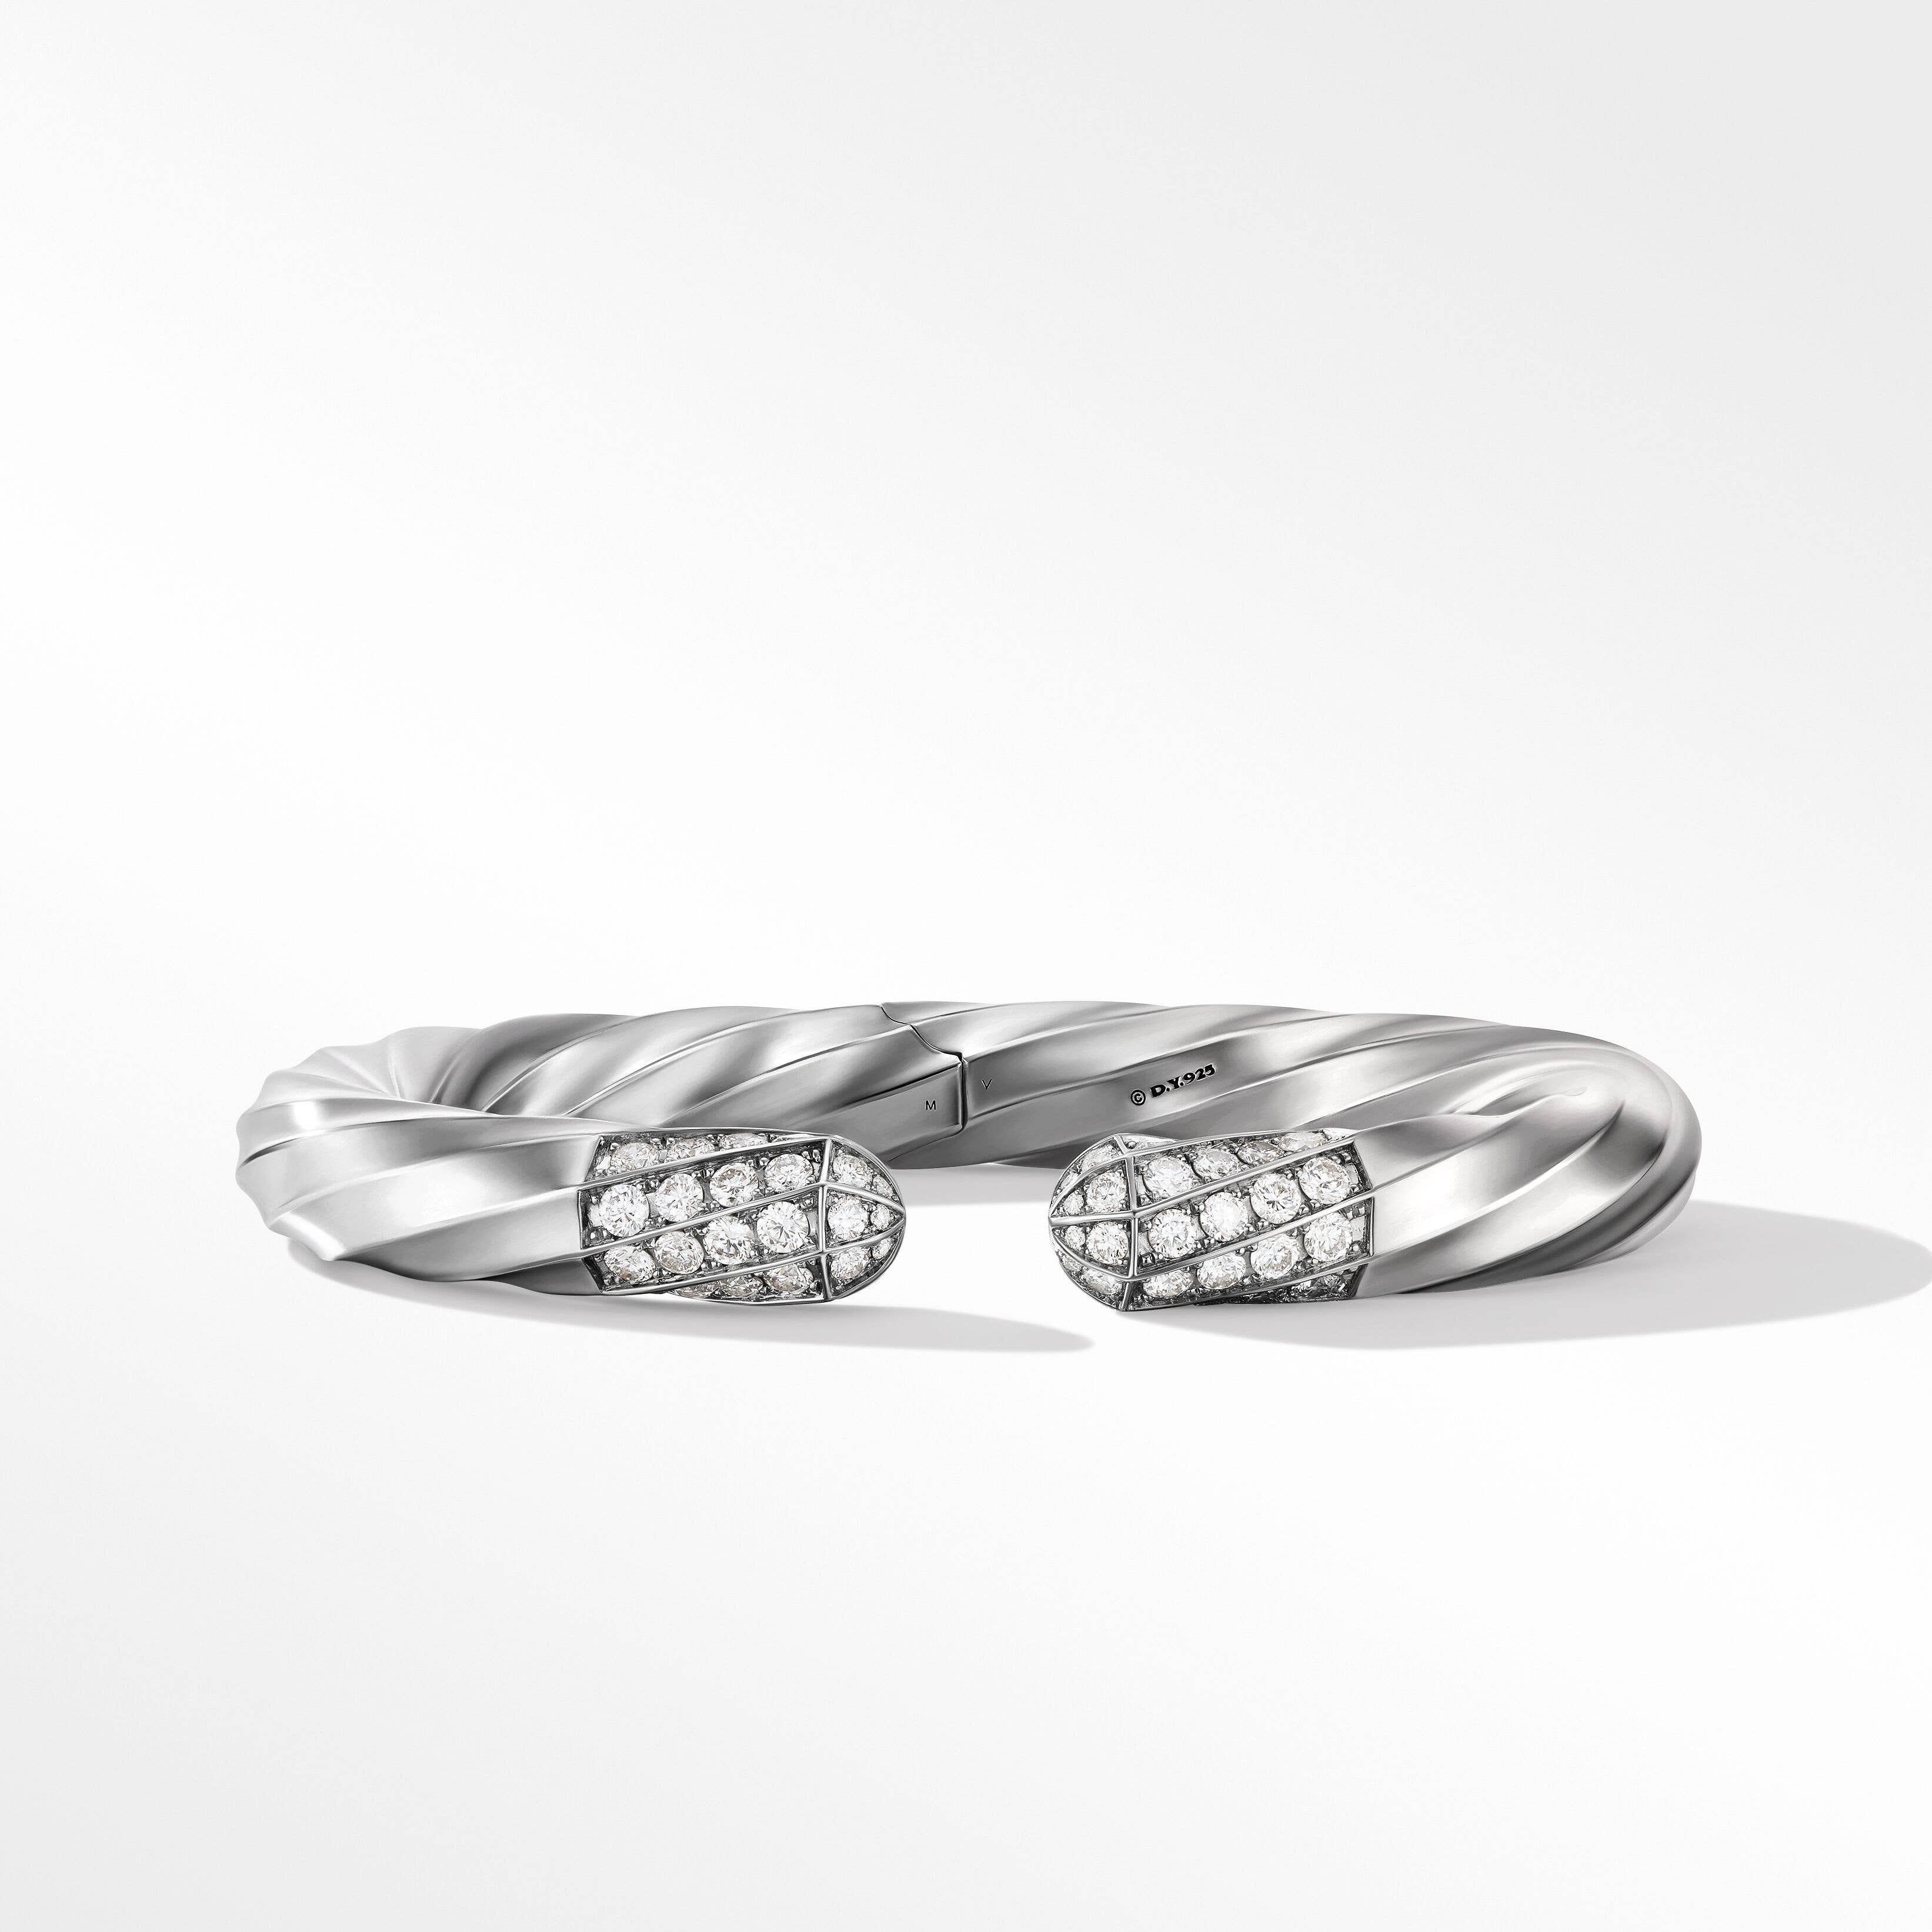 Cable Edge Cuff Bracelet in Recycled Sterling Silver with Diamonds, 9mm